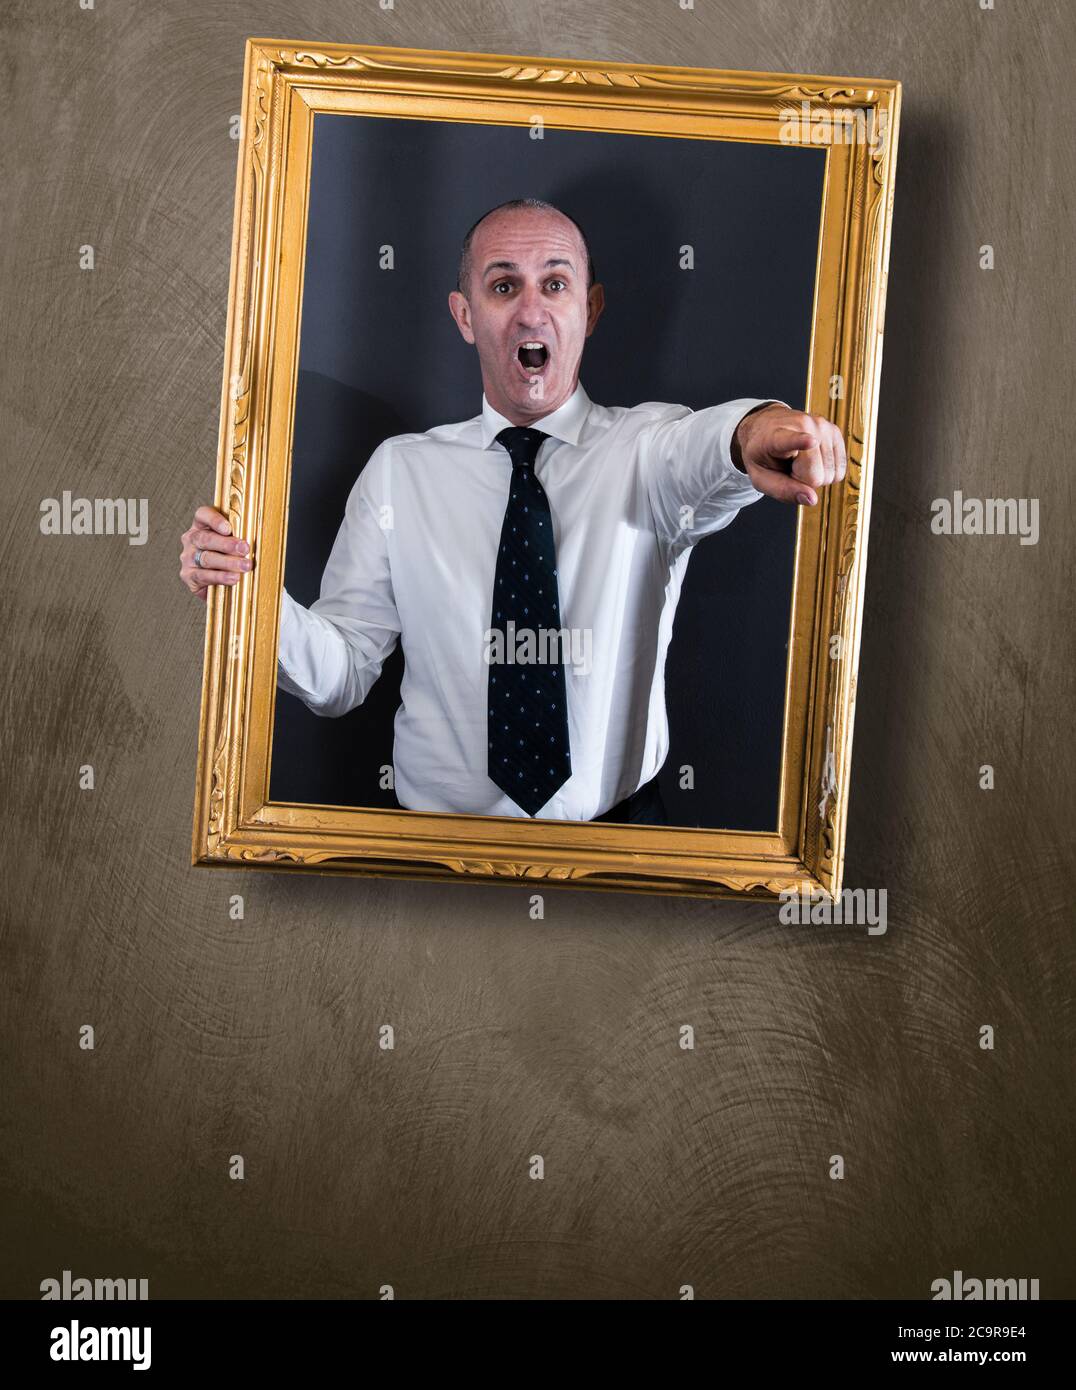 a Businessman in a picture hanging at the wall Stock Photo